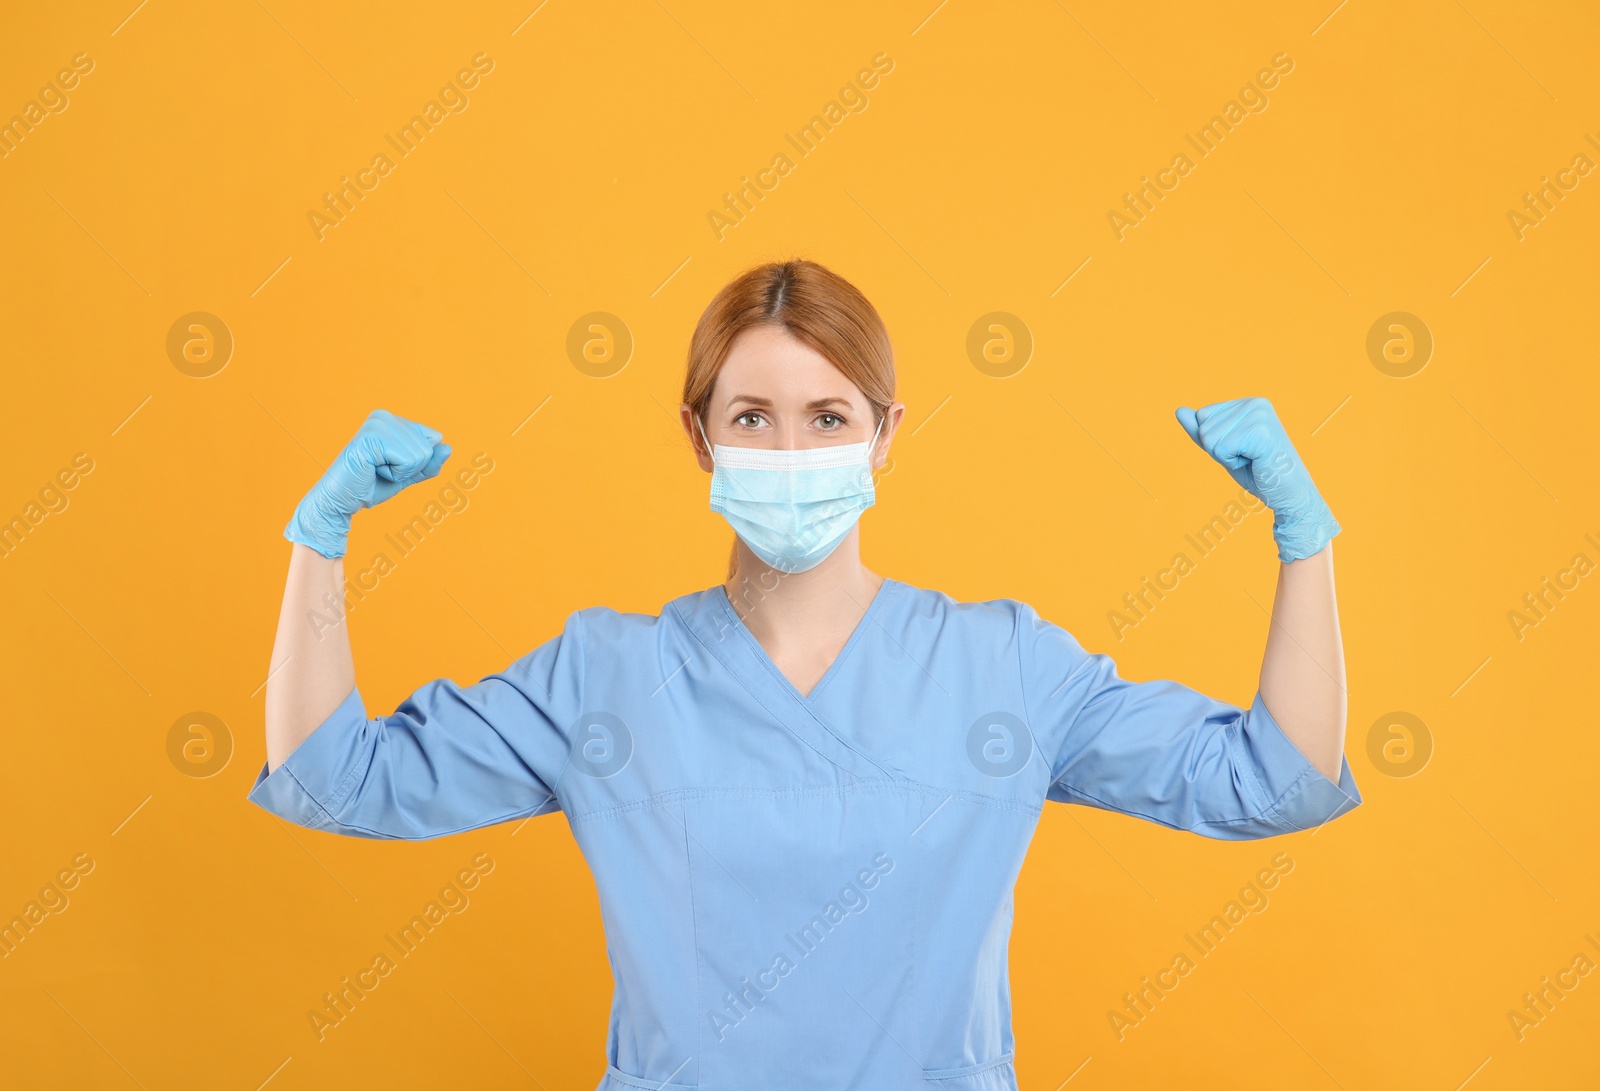 Photo of Doctor with protective mask showing muscles on yellow background. Strong immunity concept